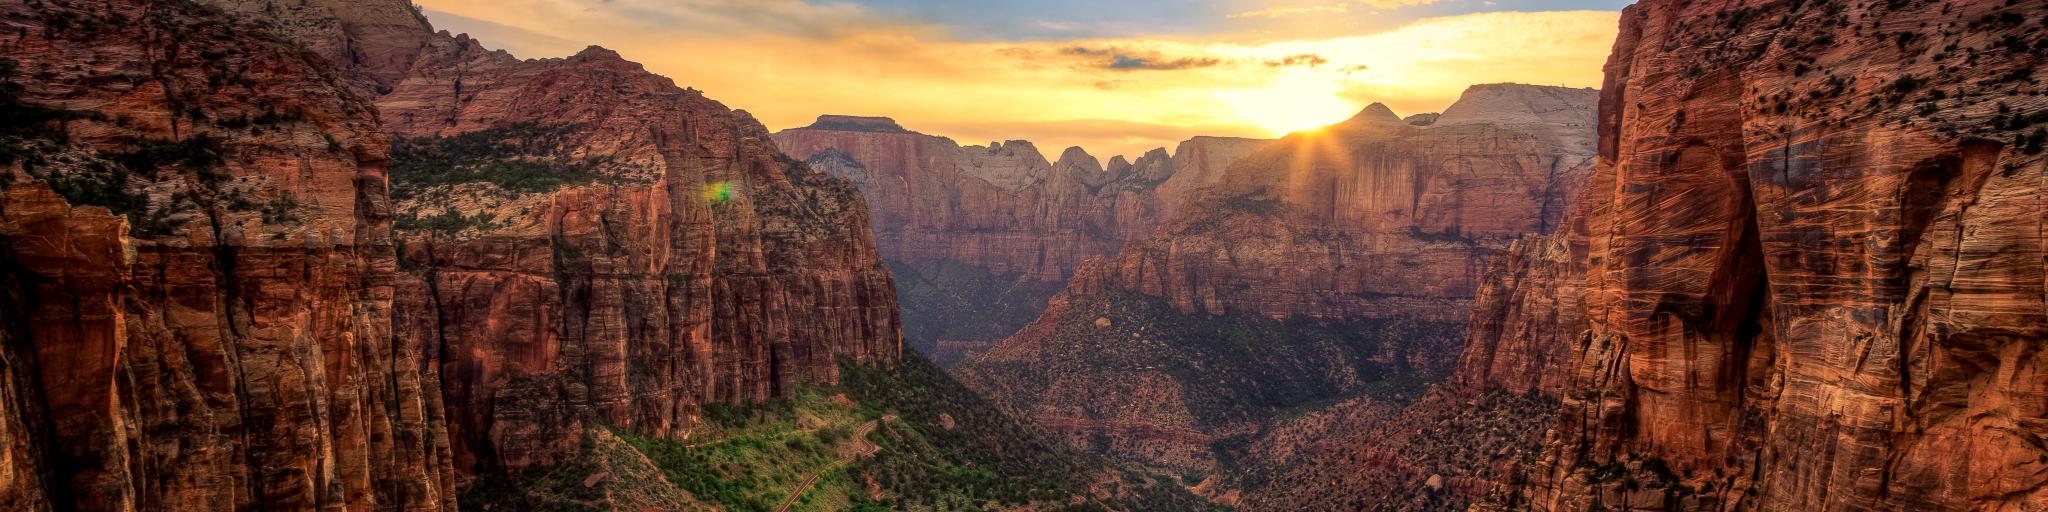 The golden sunset is cascading over the Zion Canyon in Zion National Park, Utah.